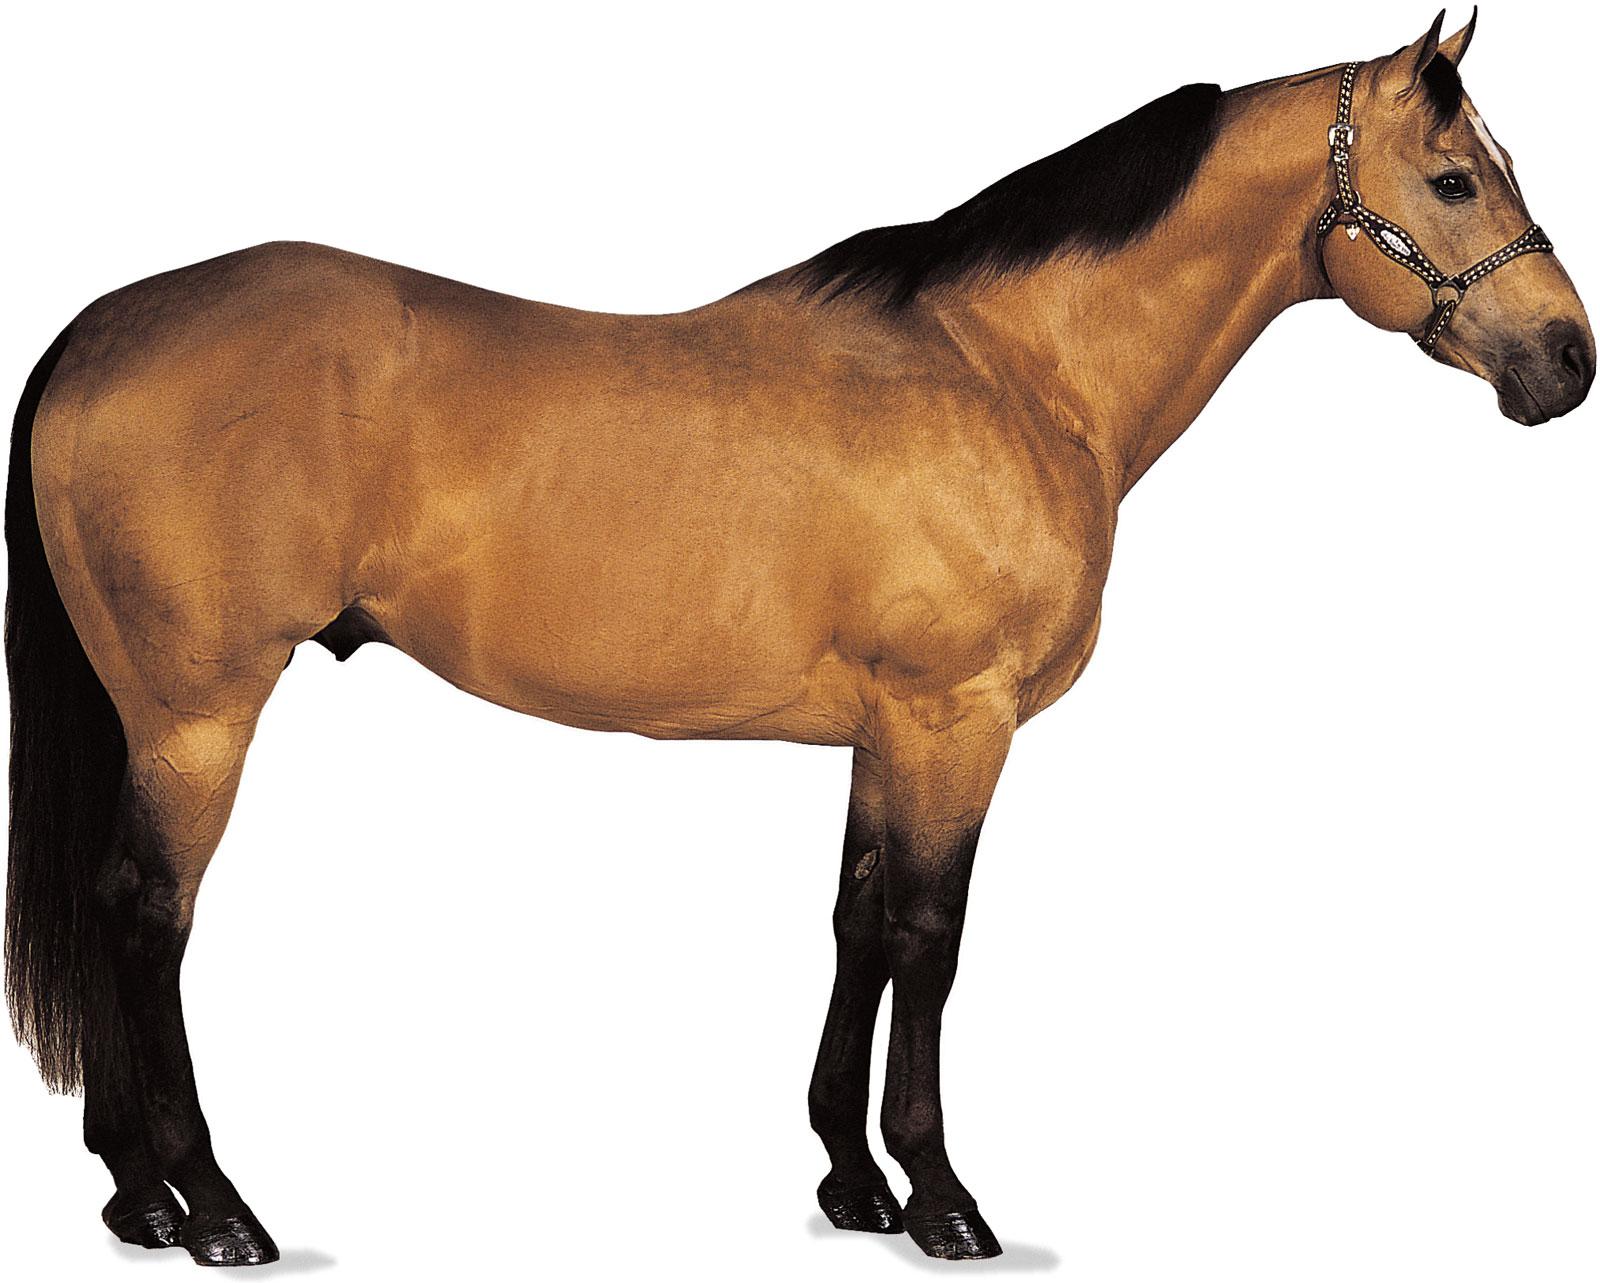 American Quarter Horse. breed of horse